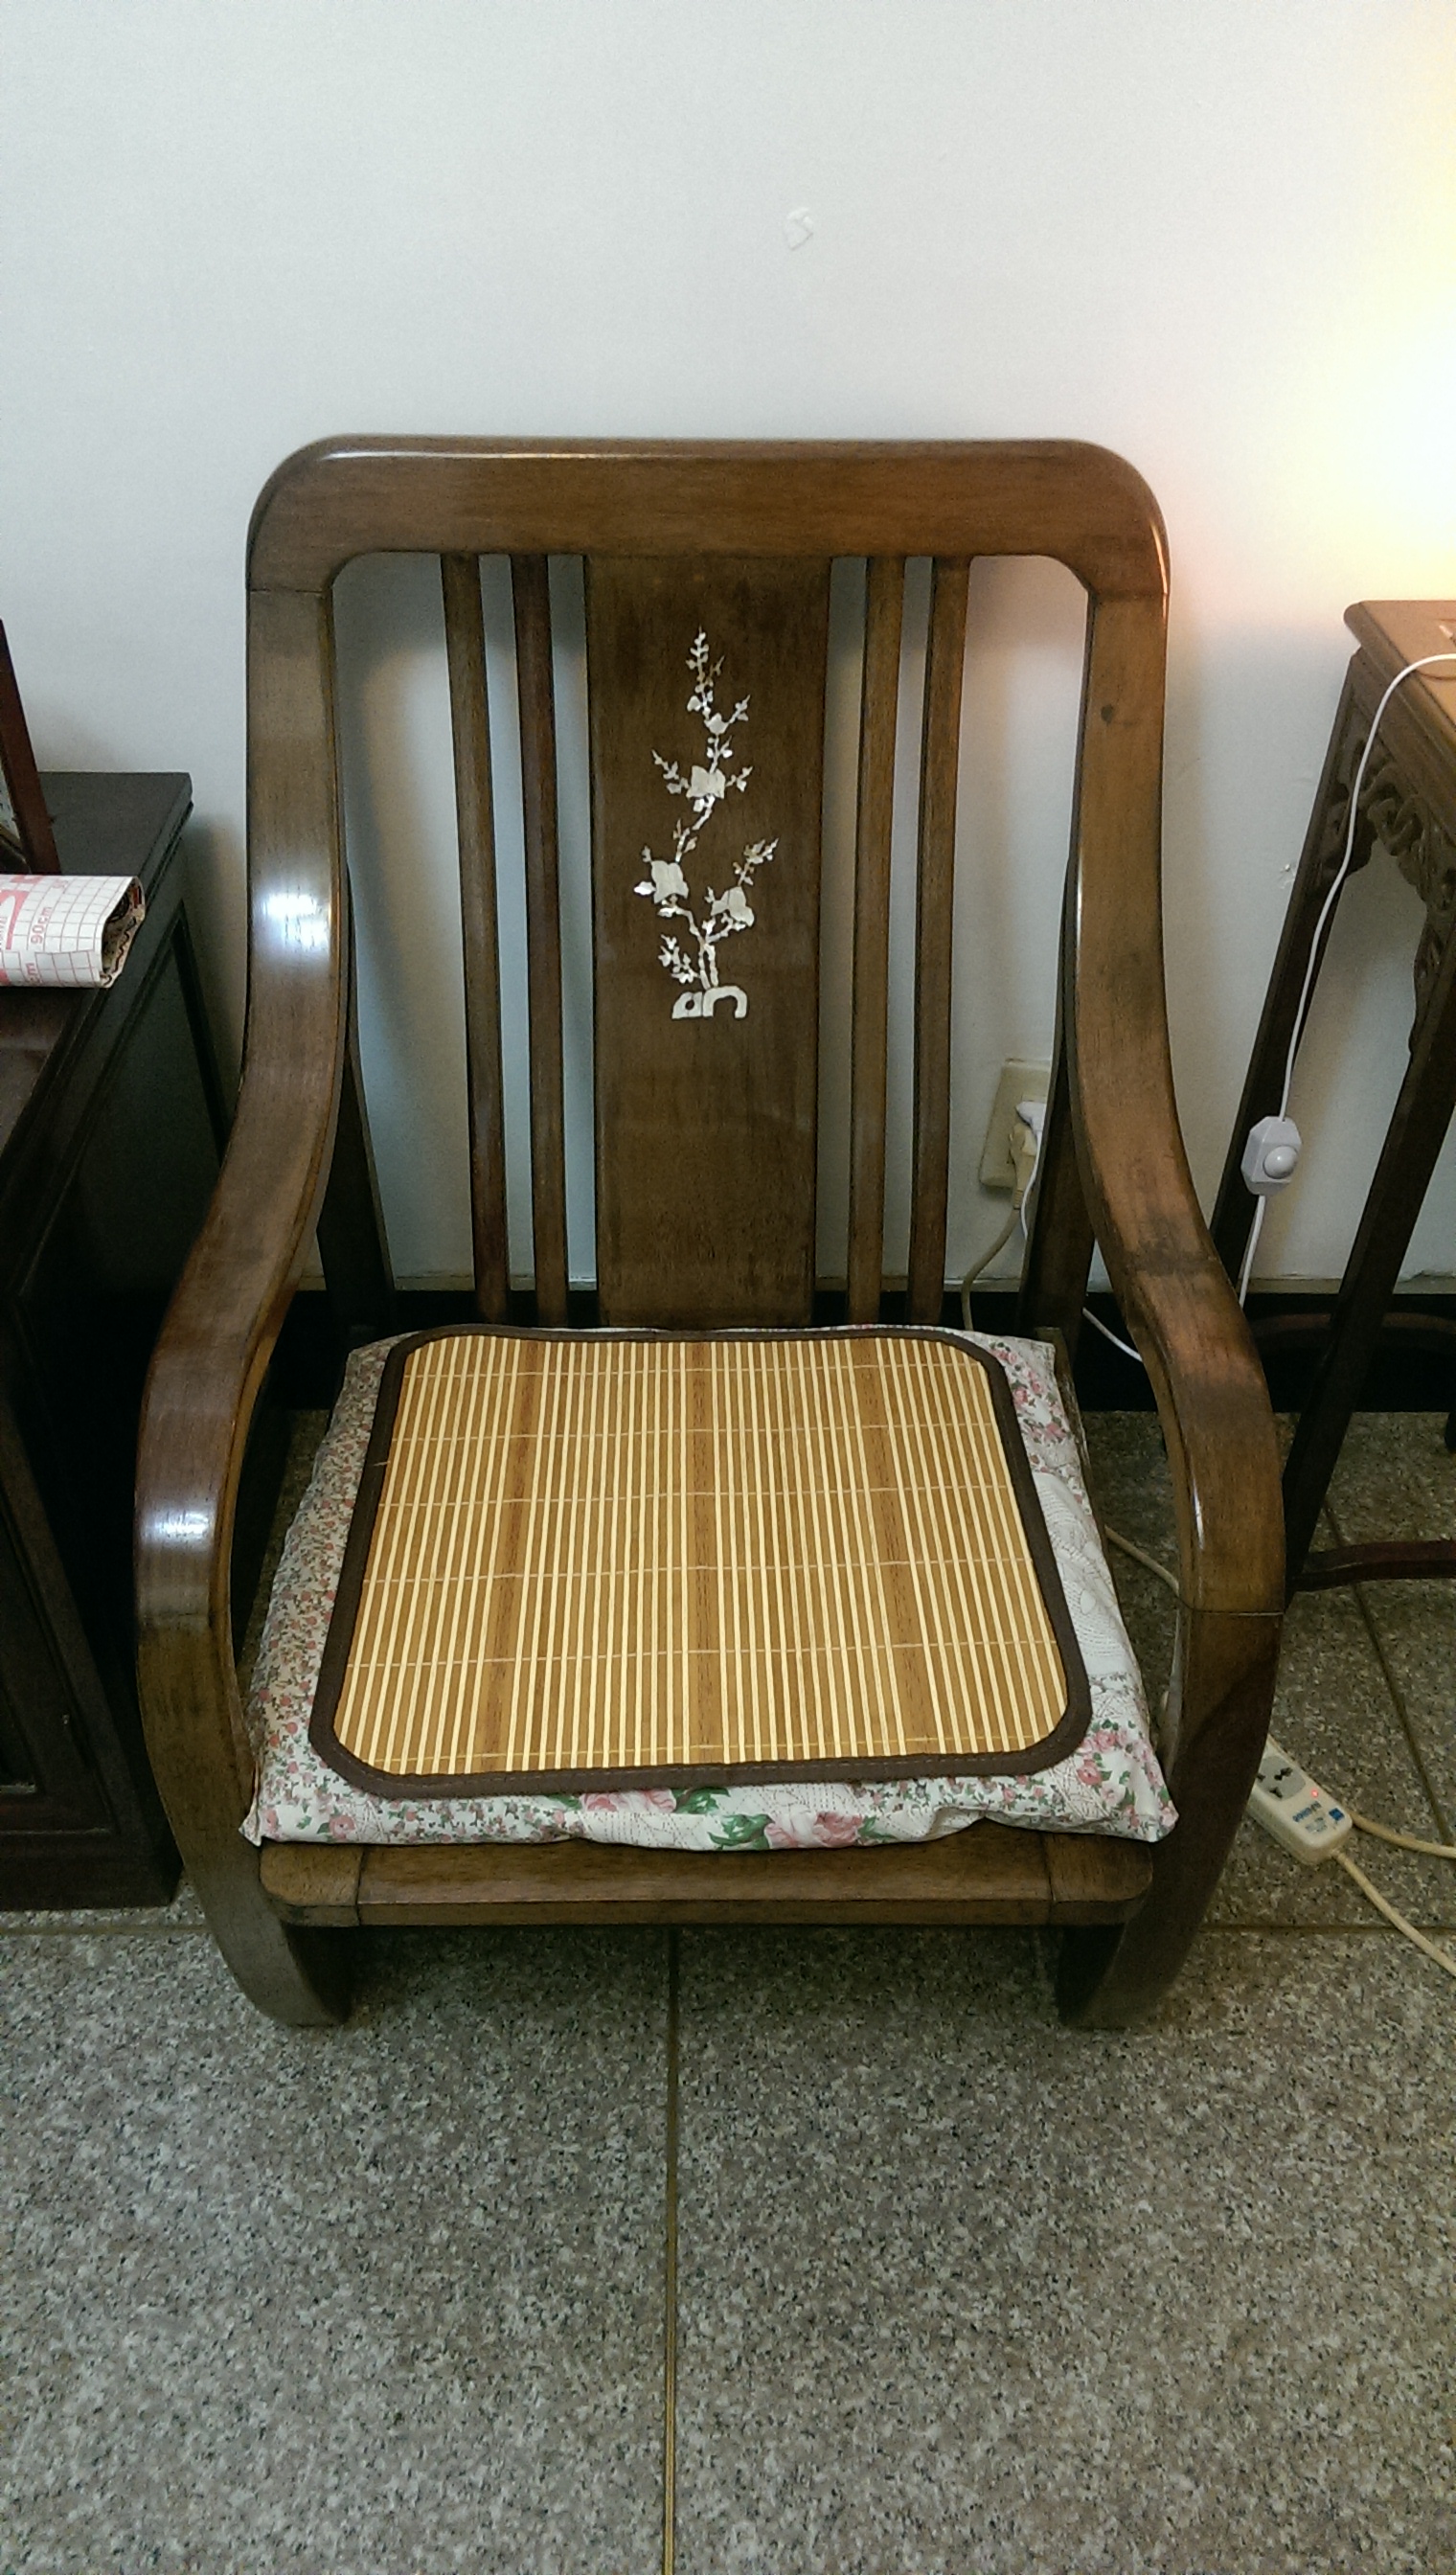 If you listen very closely, you can hear the cushion on this chair whispering 'I'm pointless...I'm pointless..'.  We still have not discovered comfort in China, to my dismay...